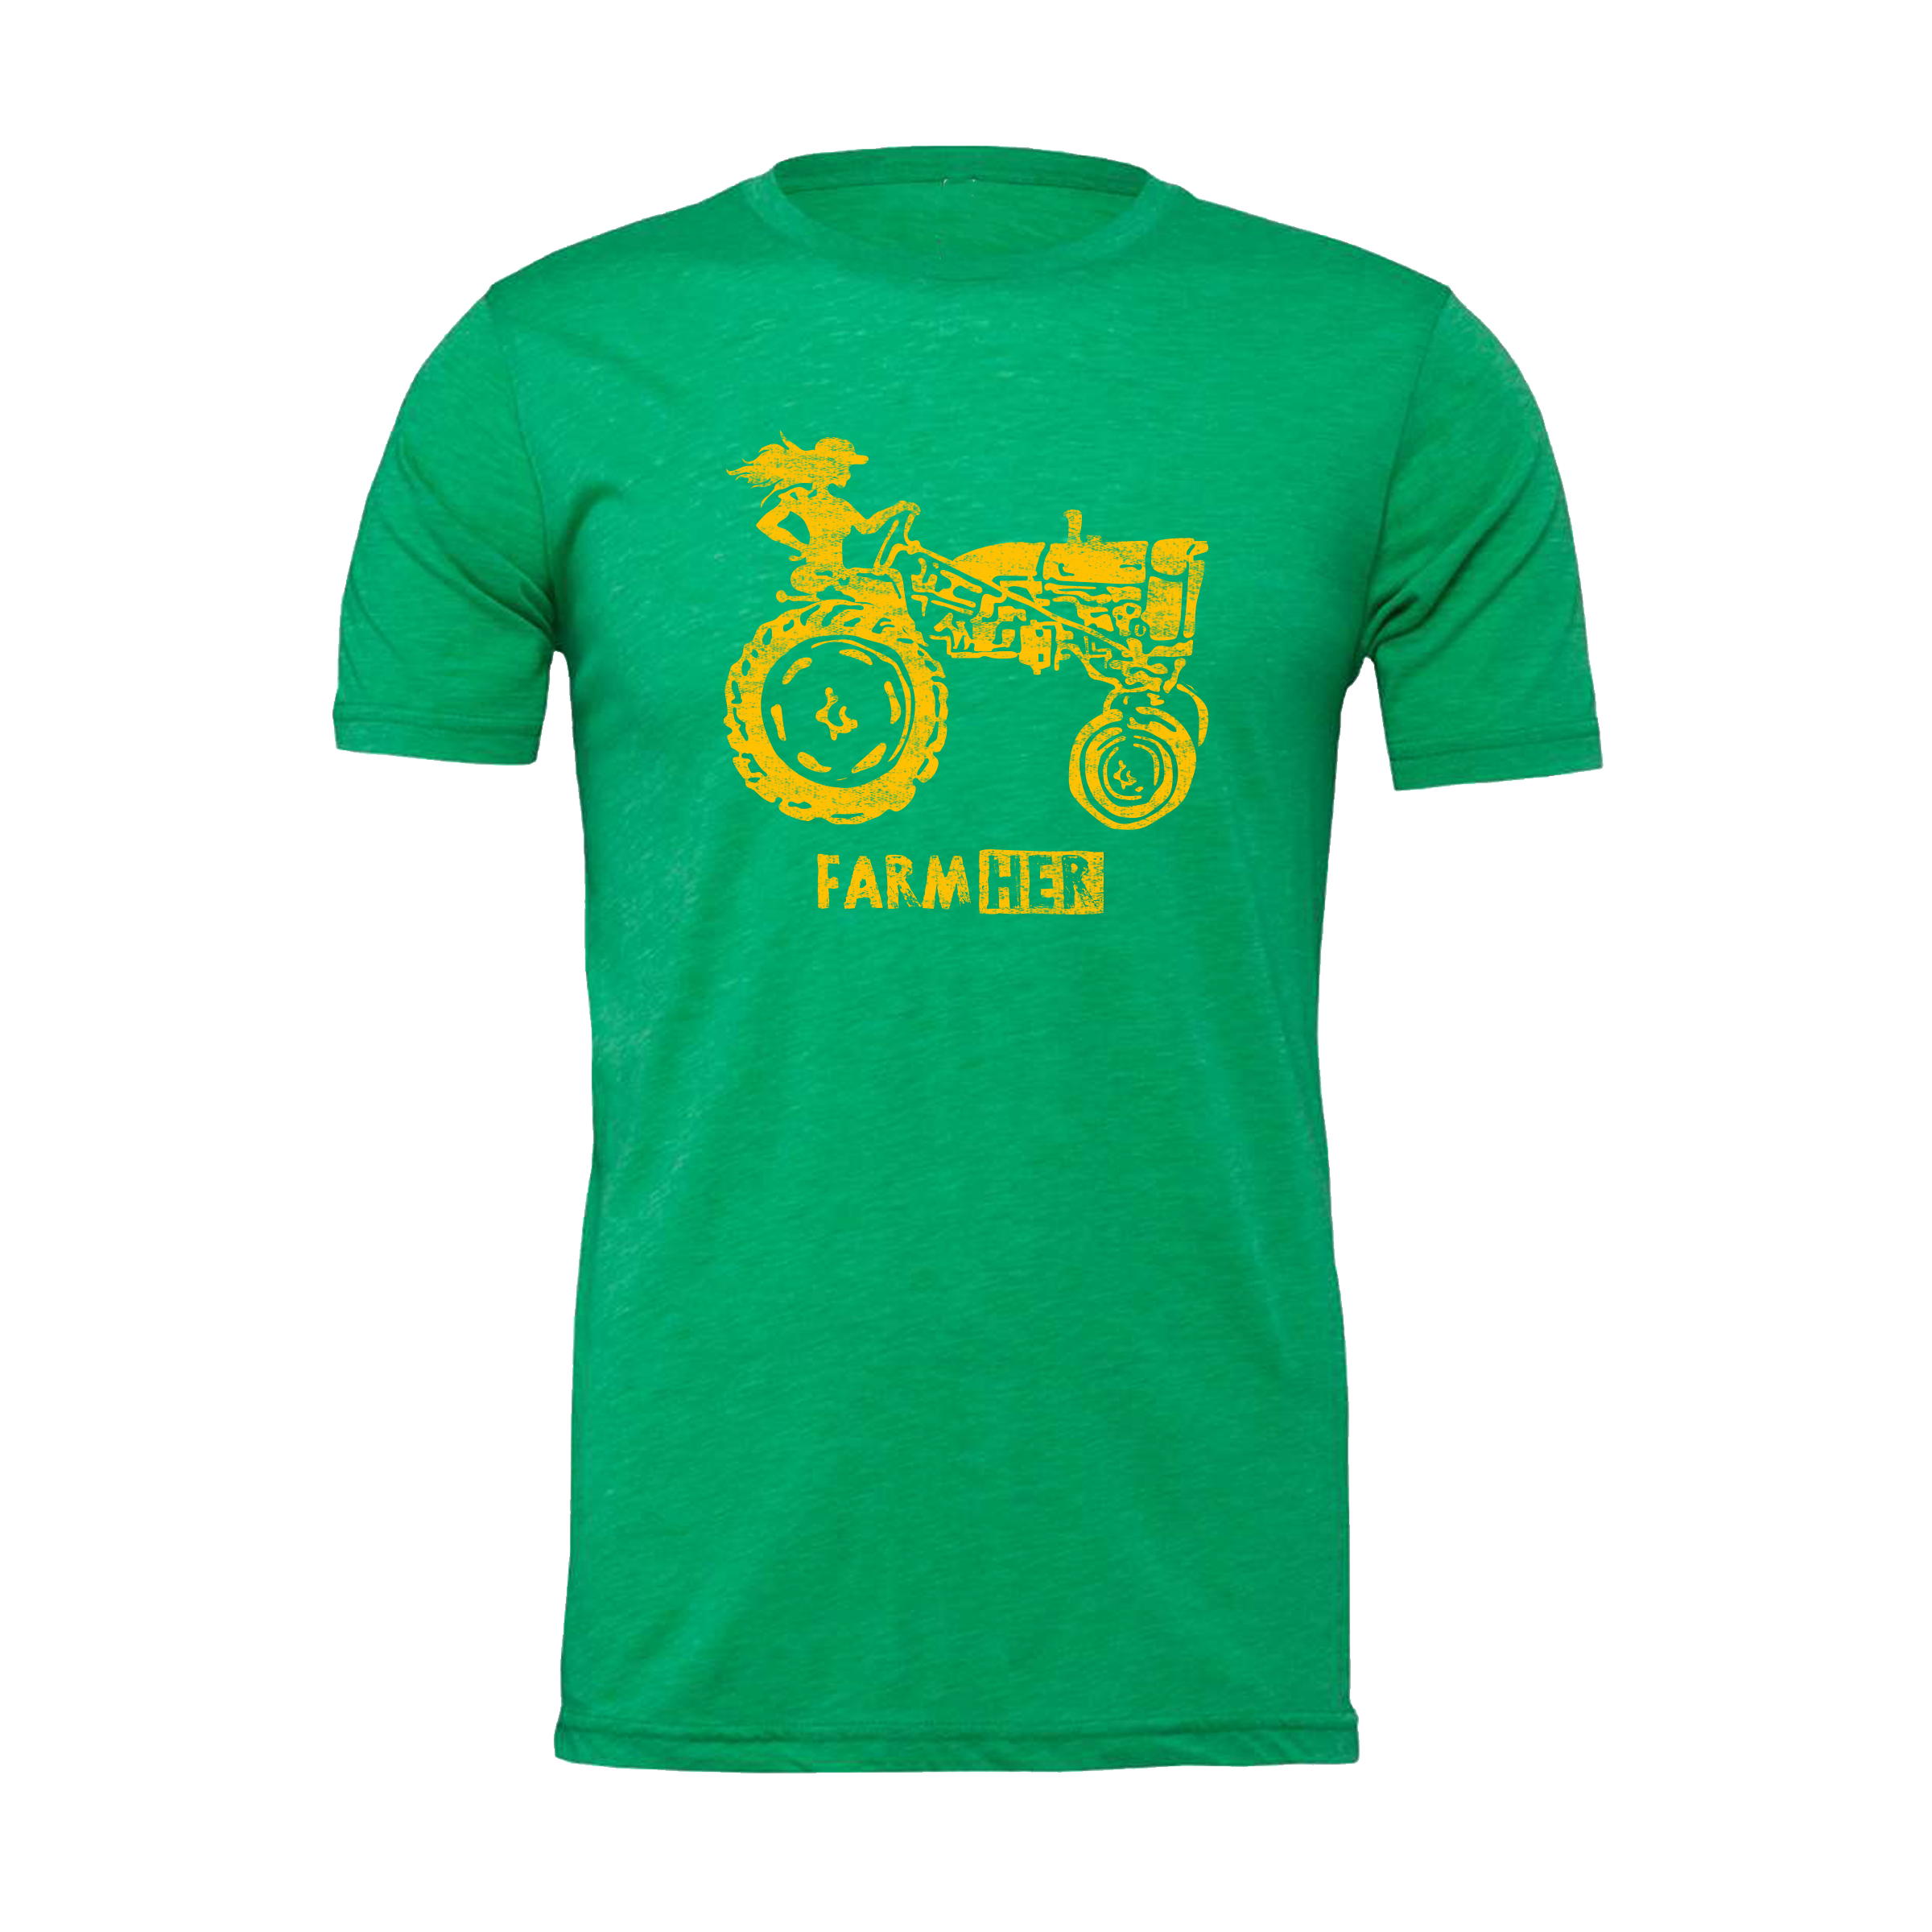 "Tractor Girl" Green FarmHer Graphic Tee